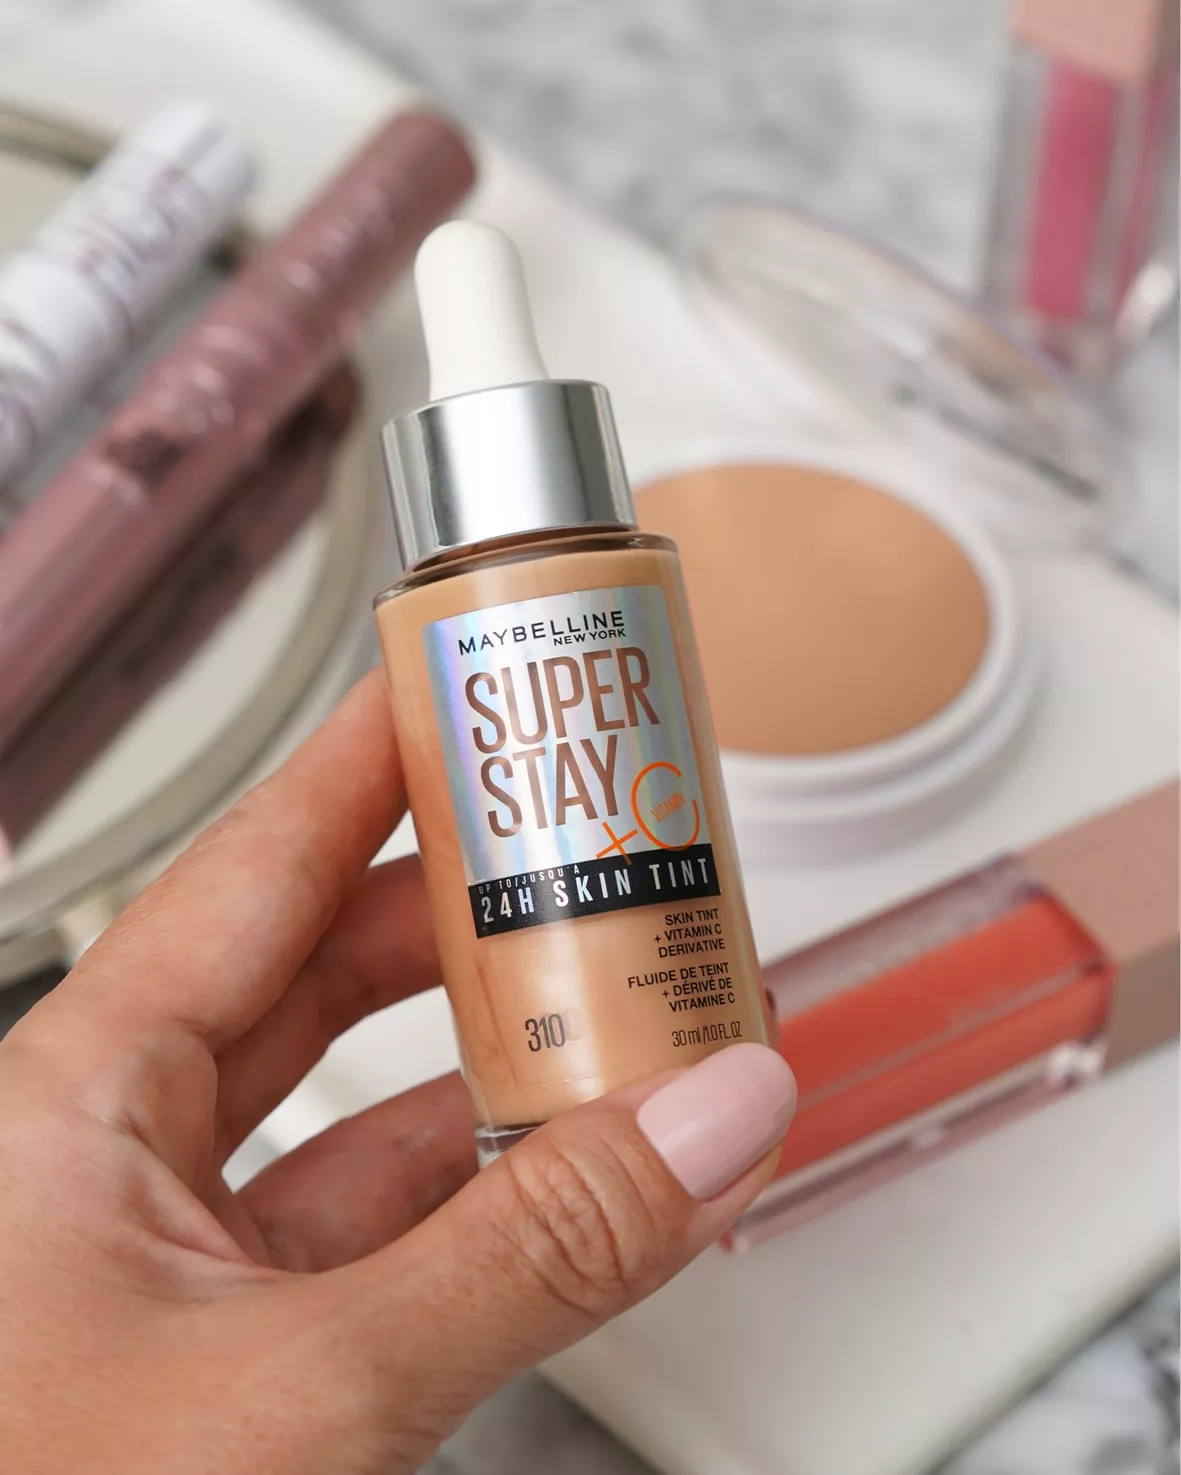 Maybelline Super Stay Super Stay Up to 24HR Skin Tint with Vitamin C, 310,  1 fl oz